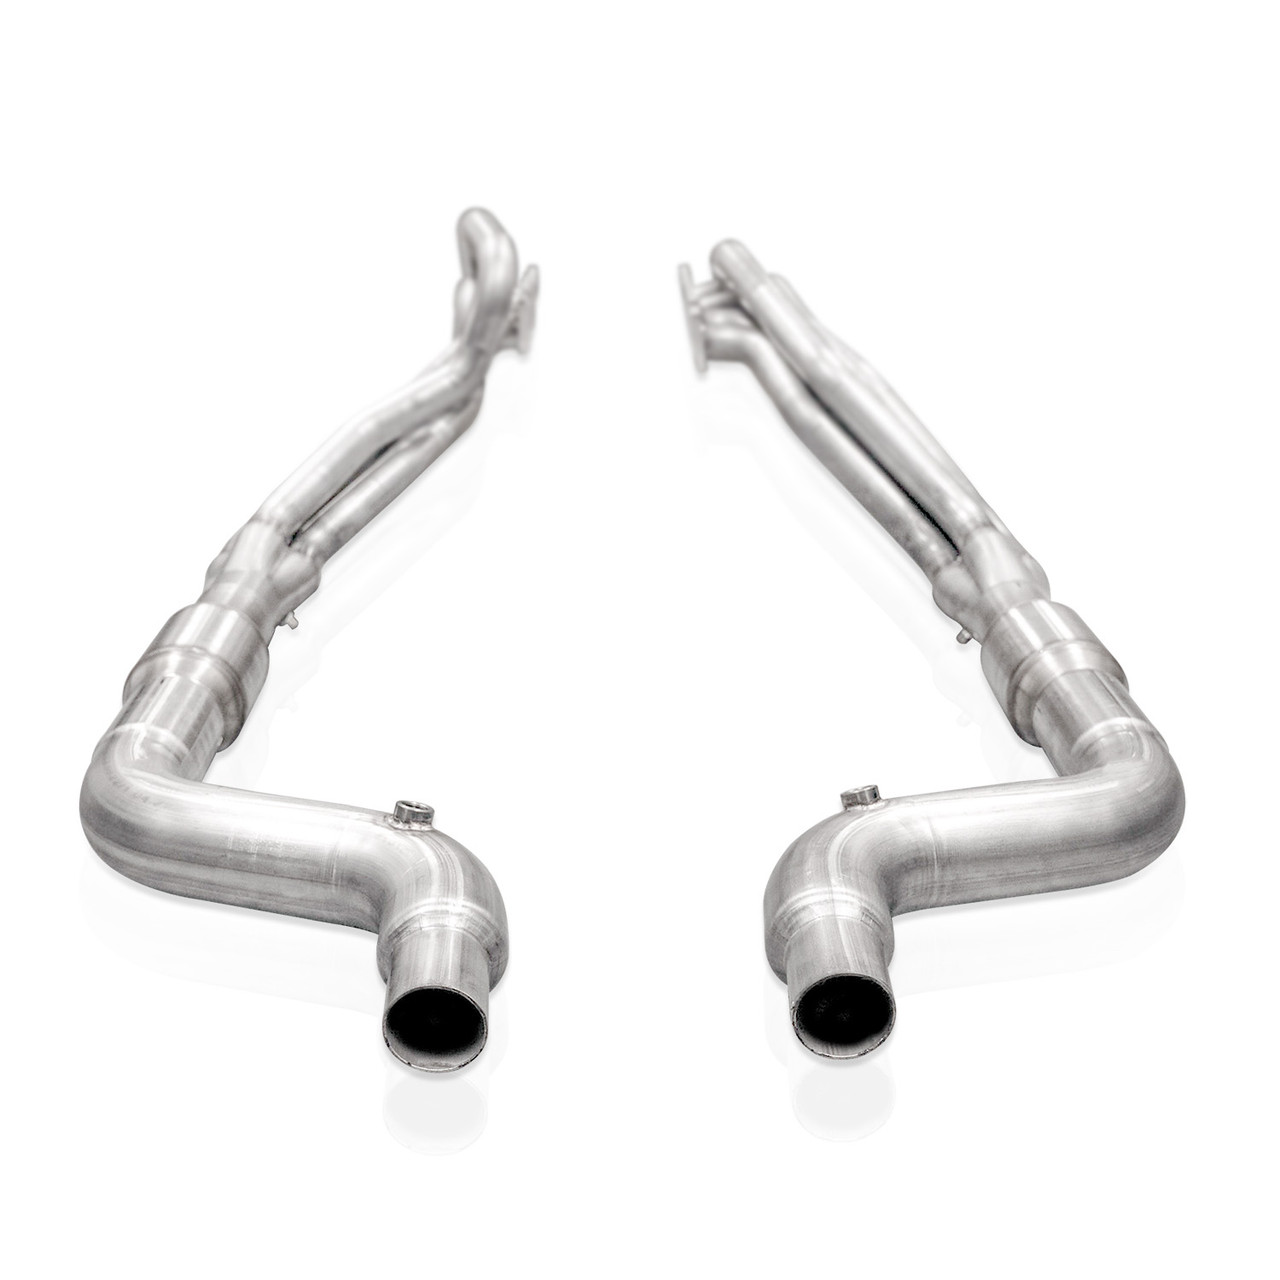 Stainless Works 1 7/8" Long Tube Headers w. High Flow Cats / Factory Connect - S550 / S650 Mustang